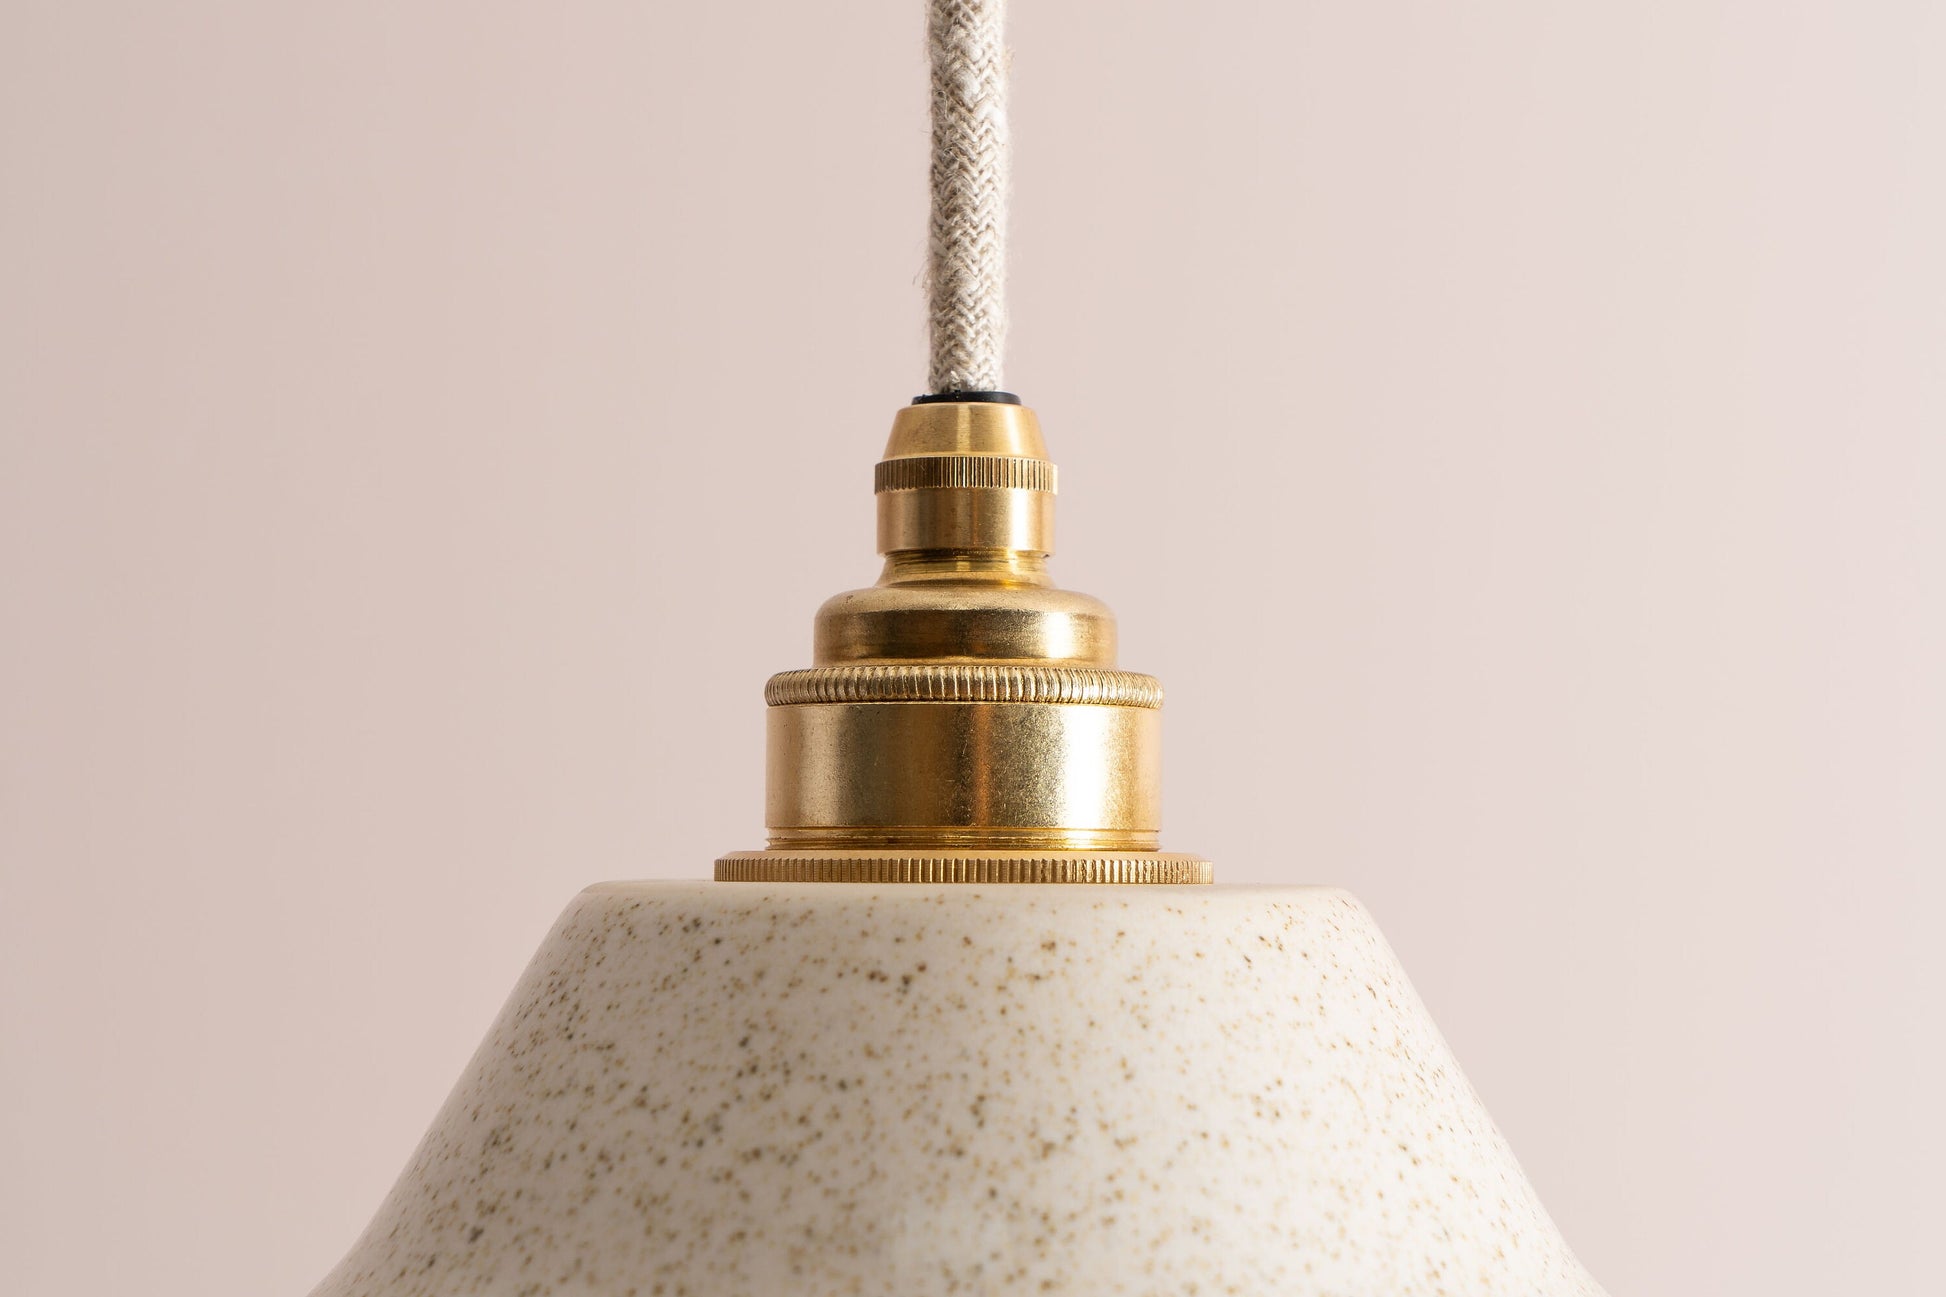 Speckled Cream Gloss Element Pendant Light in Ceramic and Brass/Nickel by StudioHaran